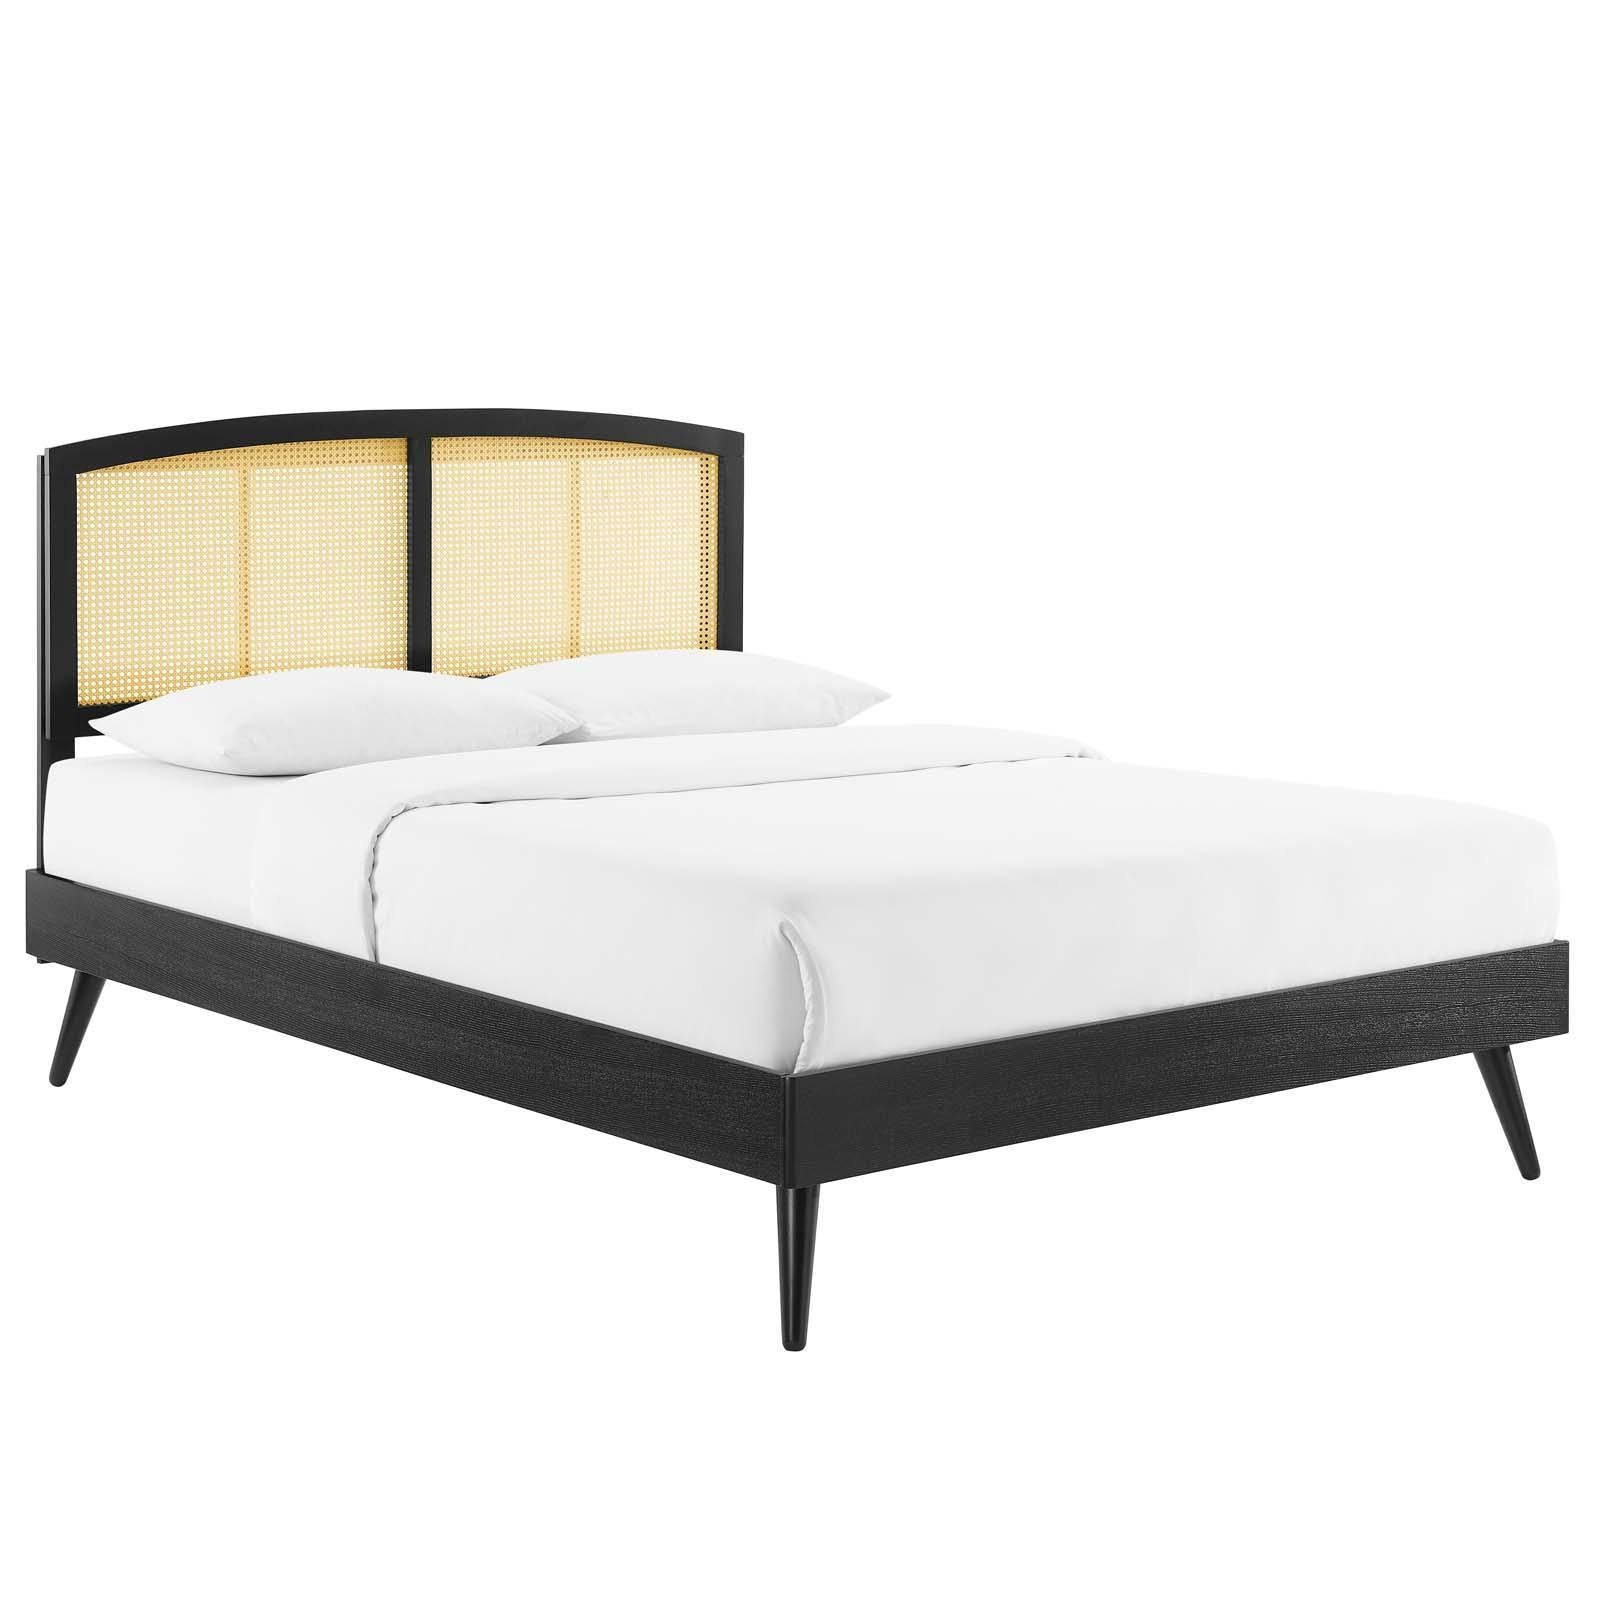 Modway Furniture Modern Sierra Cane and Wood Queen Platform Bed With Splayed Legs - MOD-6376